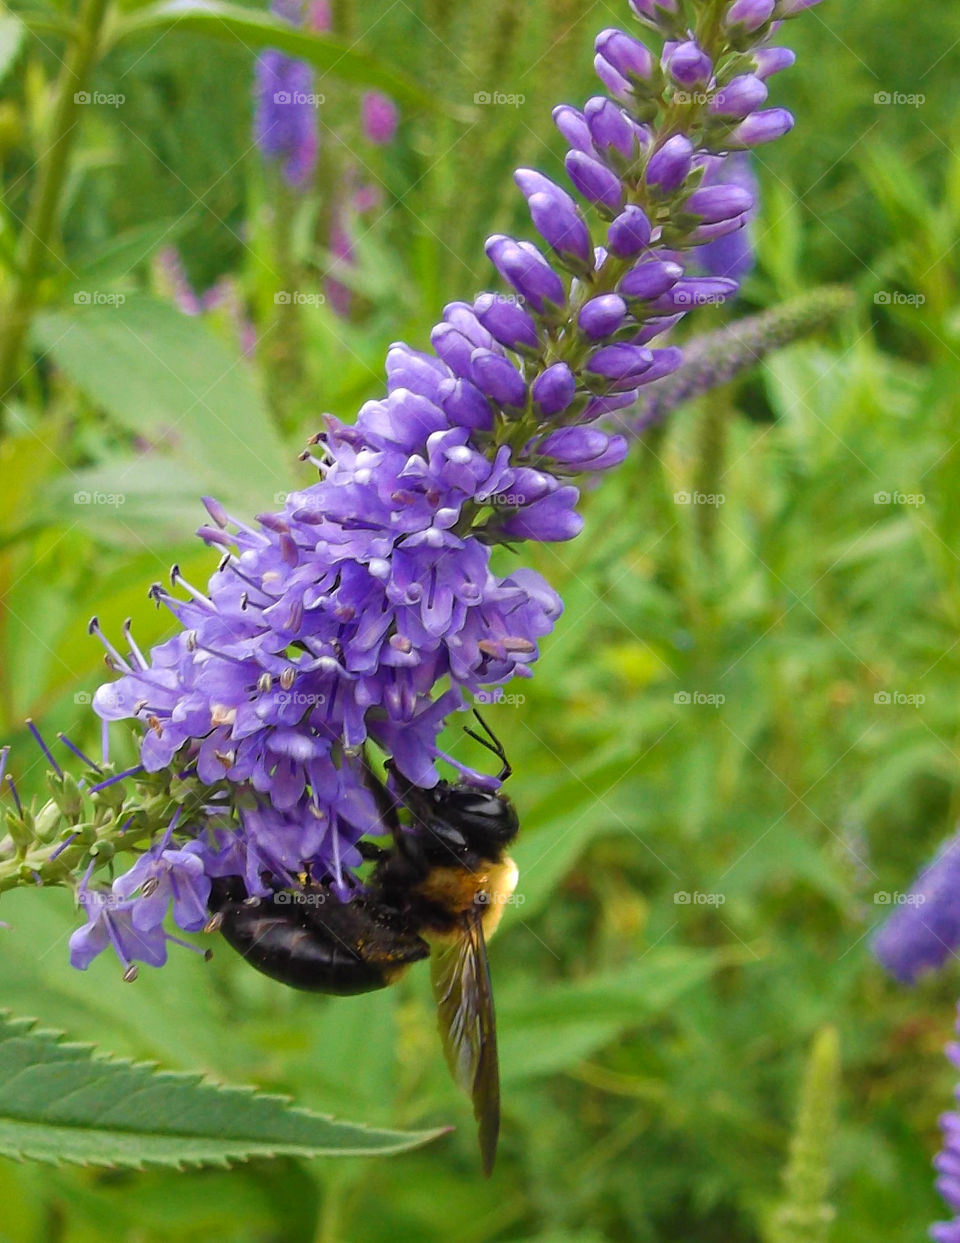 Bee on Purple Flowers. I photographed this bee at Powell Gardens in Missouri.